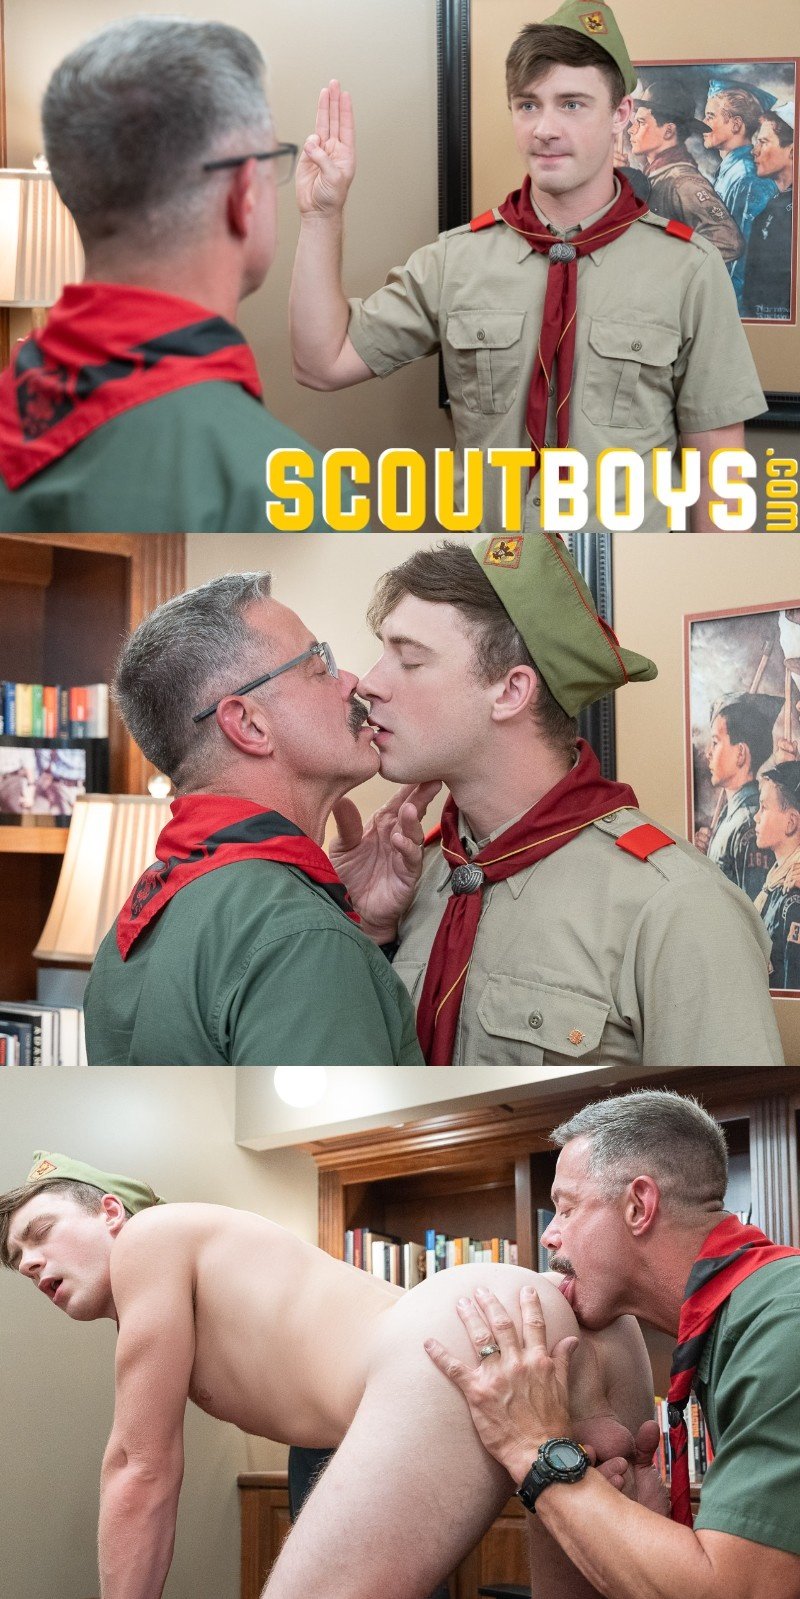 Scout Leader Rams His 9 Inches Into Lad's Tight Hole